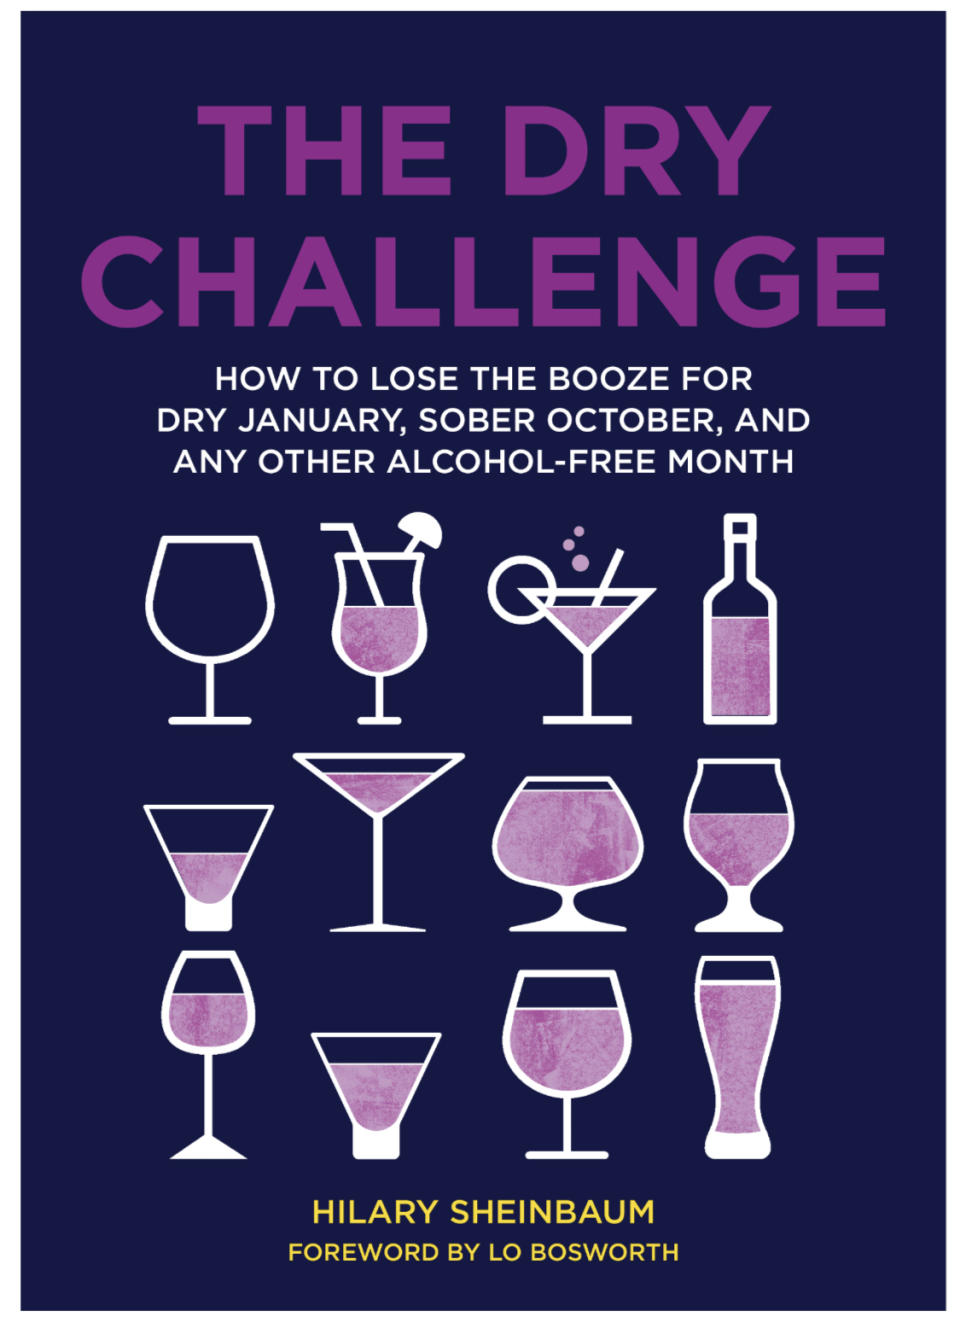 "The Dry Challenge" book cover